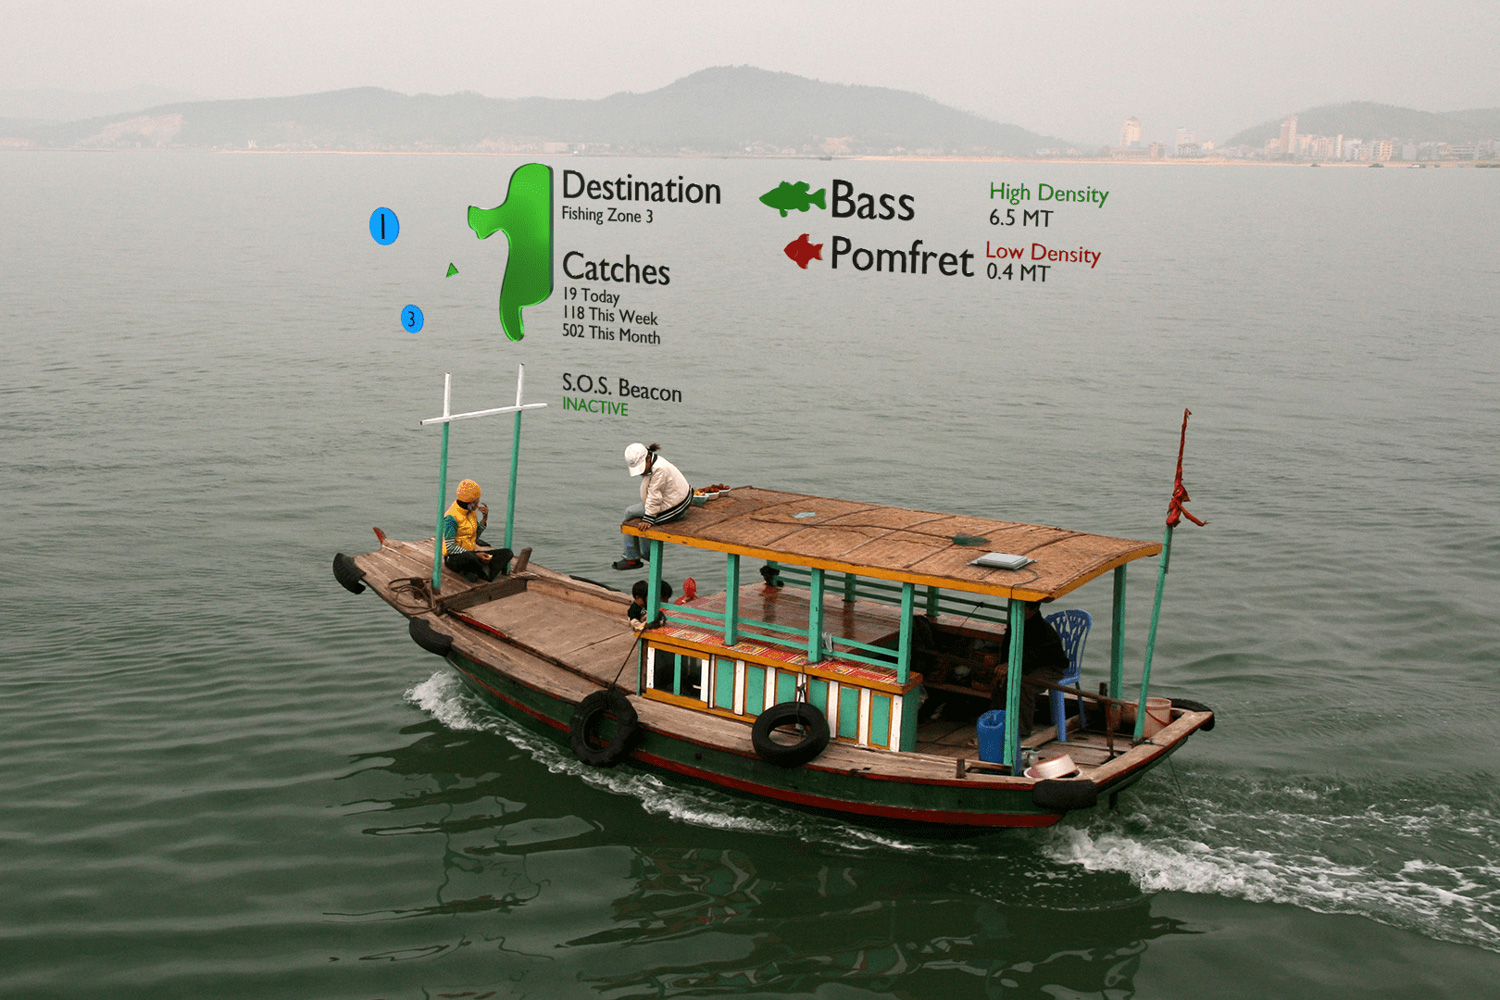 boat in the water with people and graphics on the image